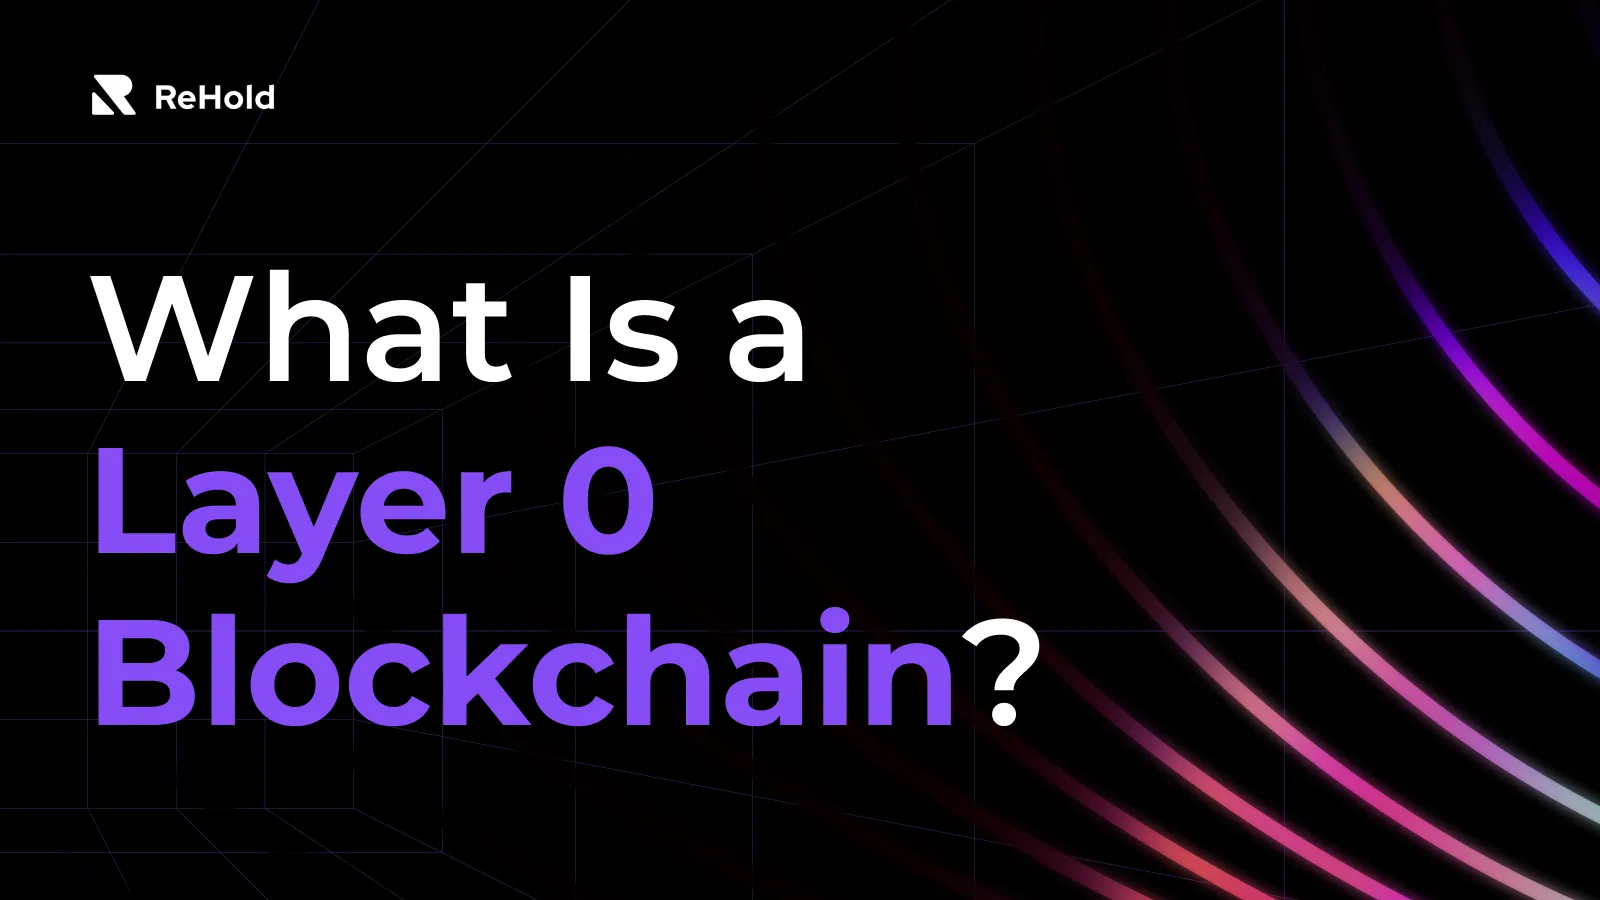 What Is a Layer 0 Blockchain?